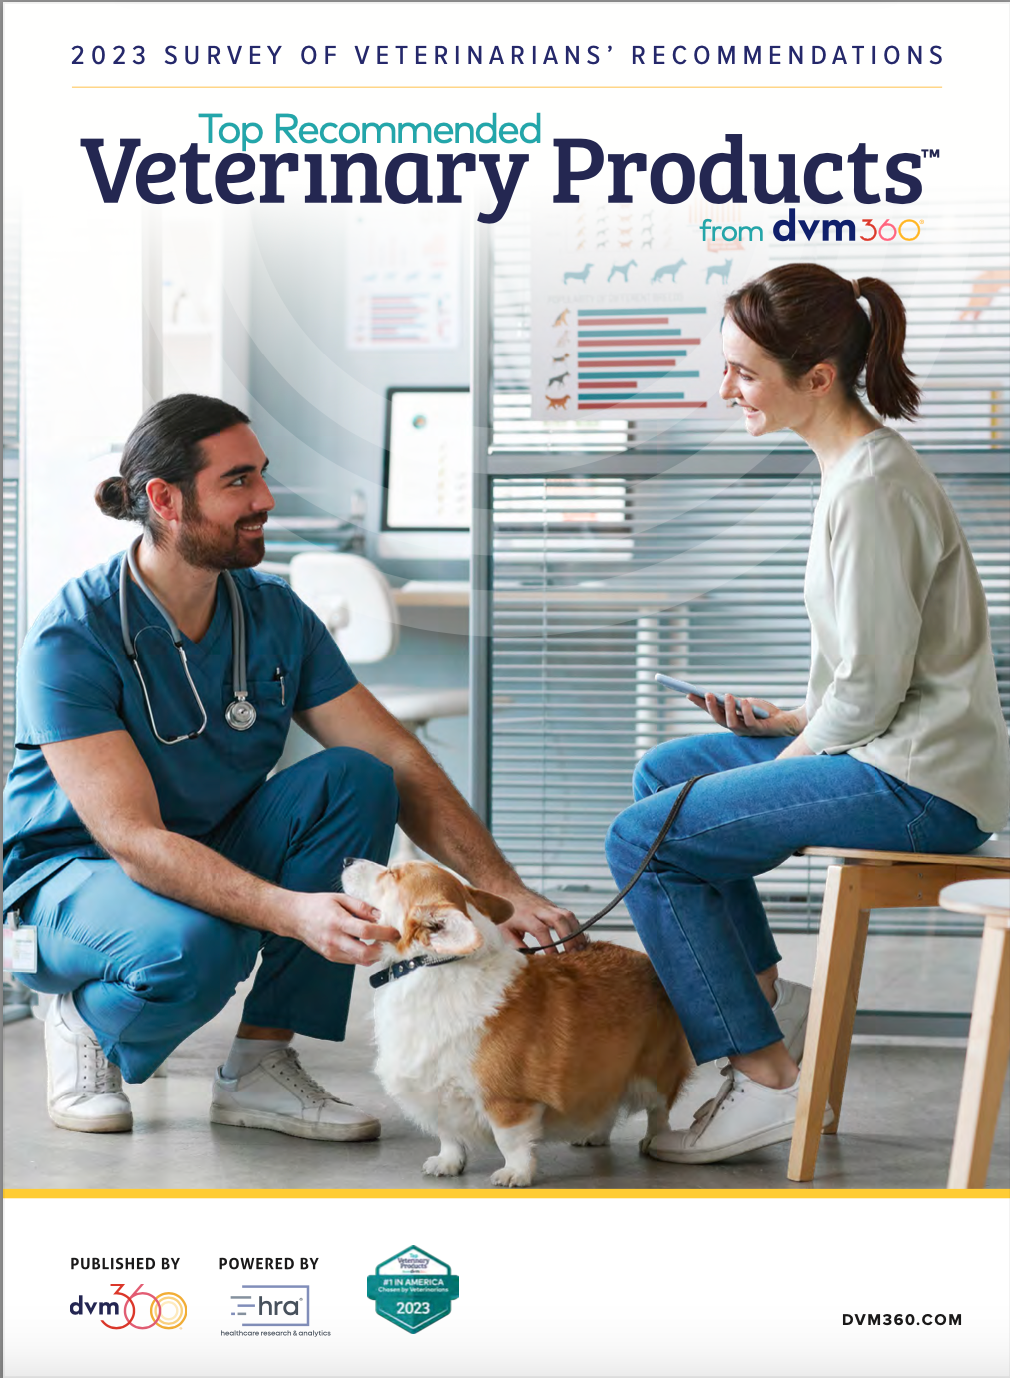 2023 Top Recommended Veterinary Products Guide